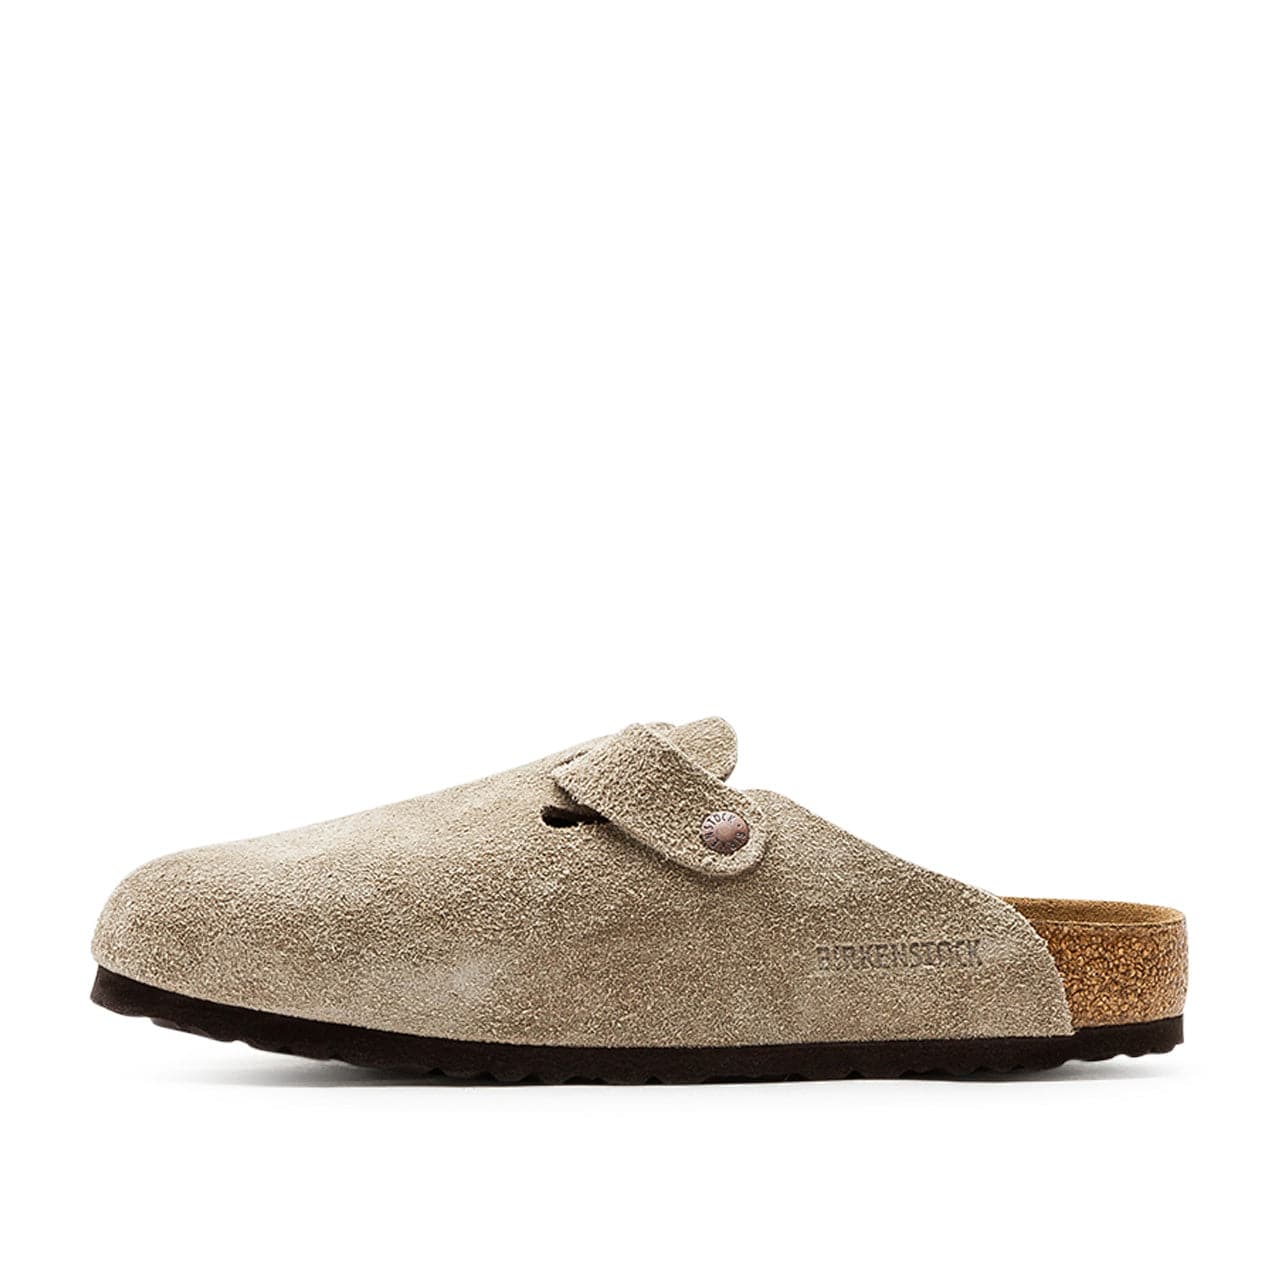 Birkenstock Boston Soft Footbed Suede Leather (Taupe)  - Allike Store